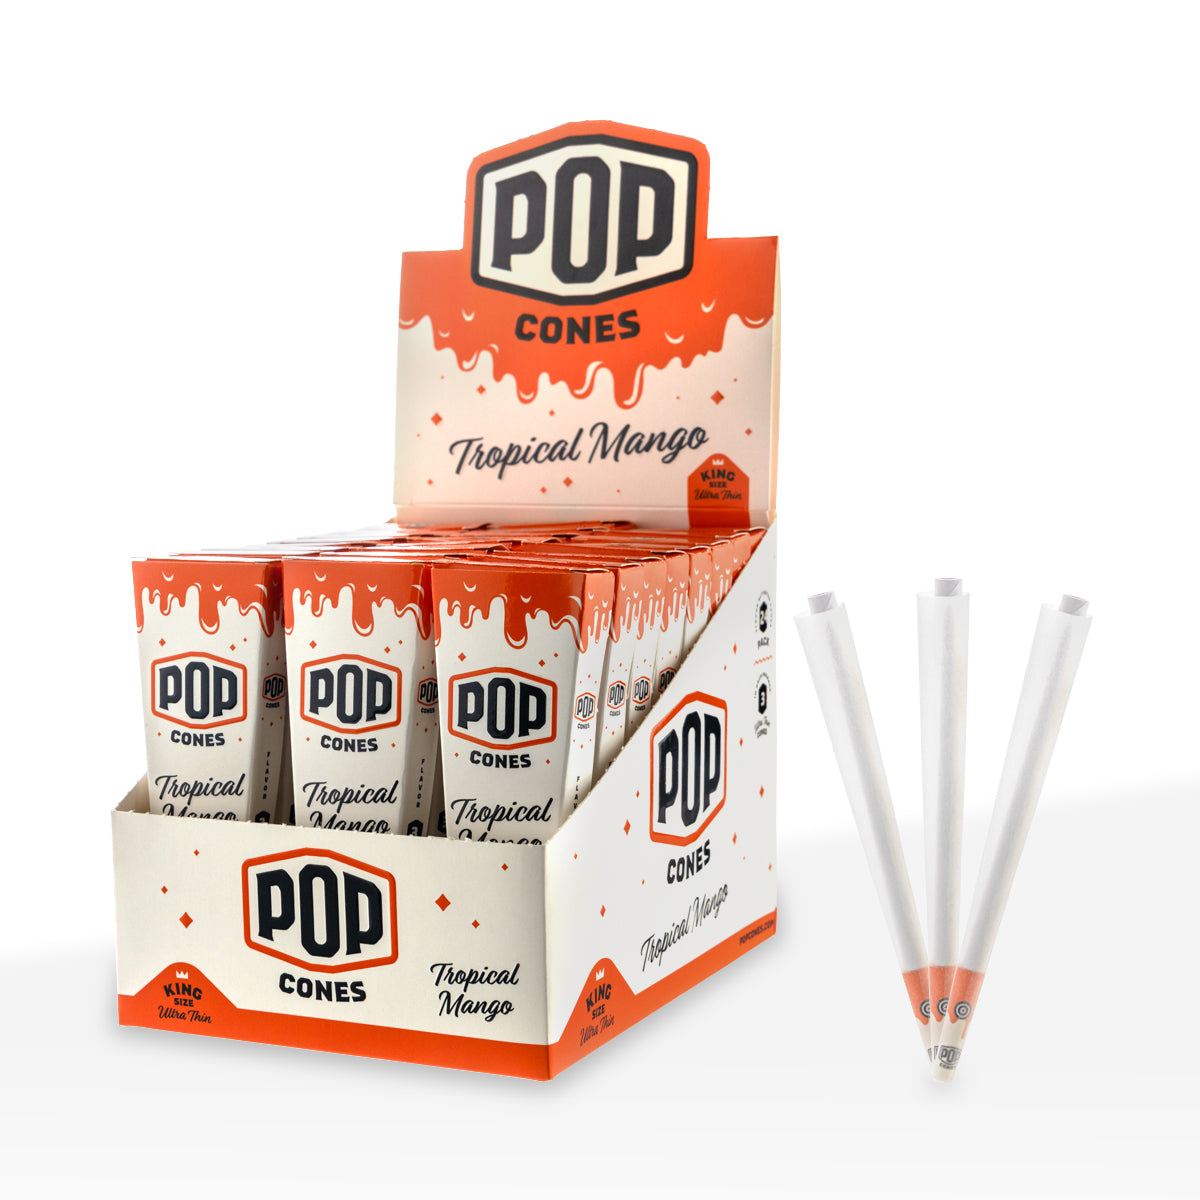 Pop Cones | Ultra Thin Pre-Rolled Cones King Size | 109mm - 3 Pack 24 Count - Various Flavors Pre-Rolled Cones Biohazard Inc Tropical Mango  